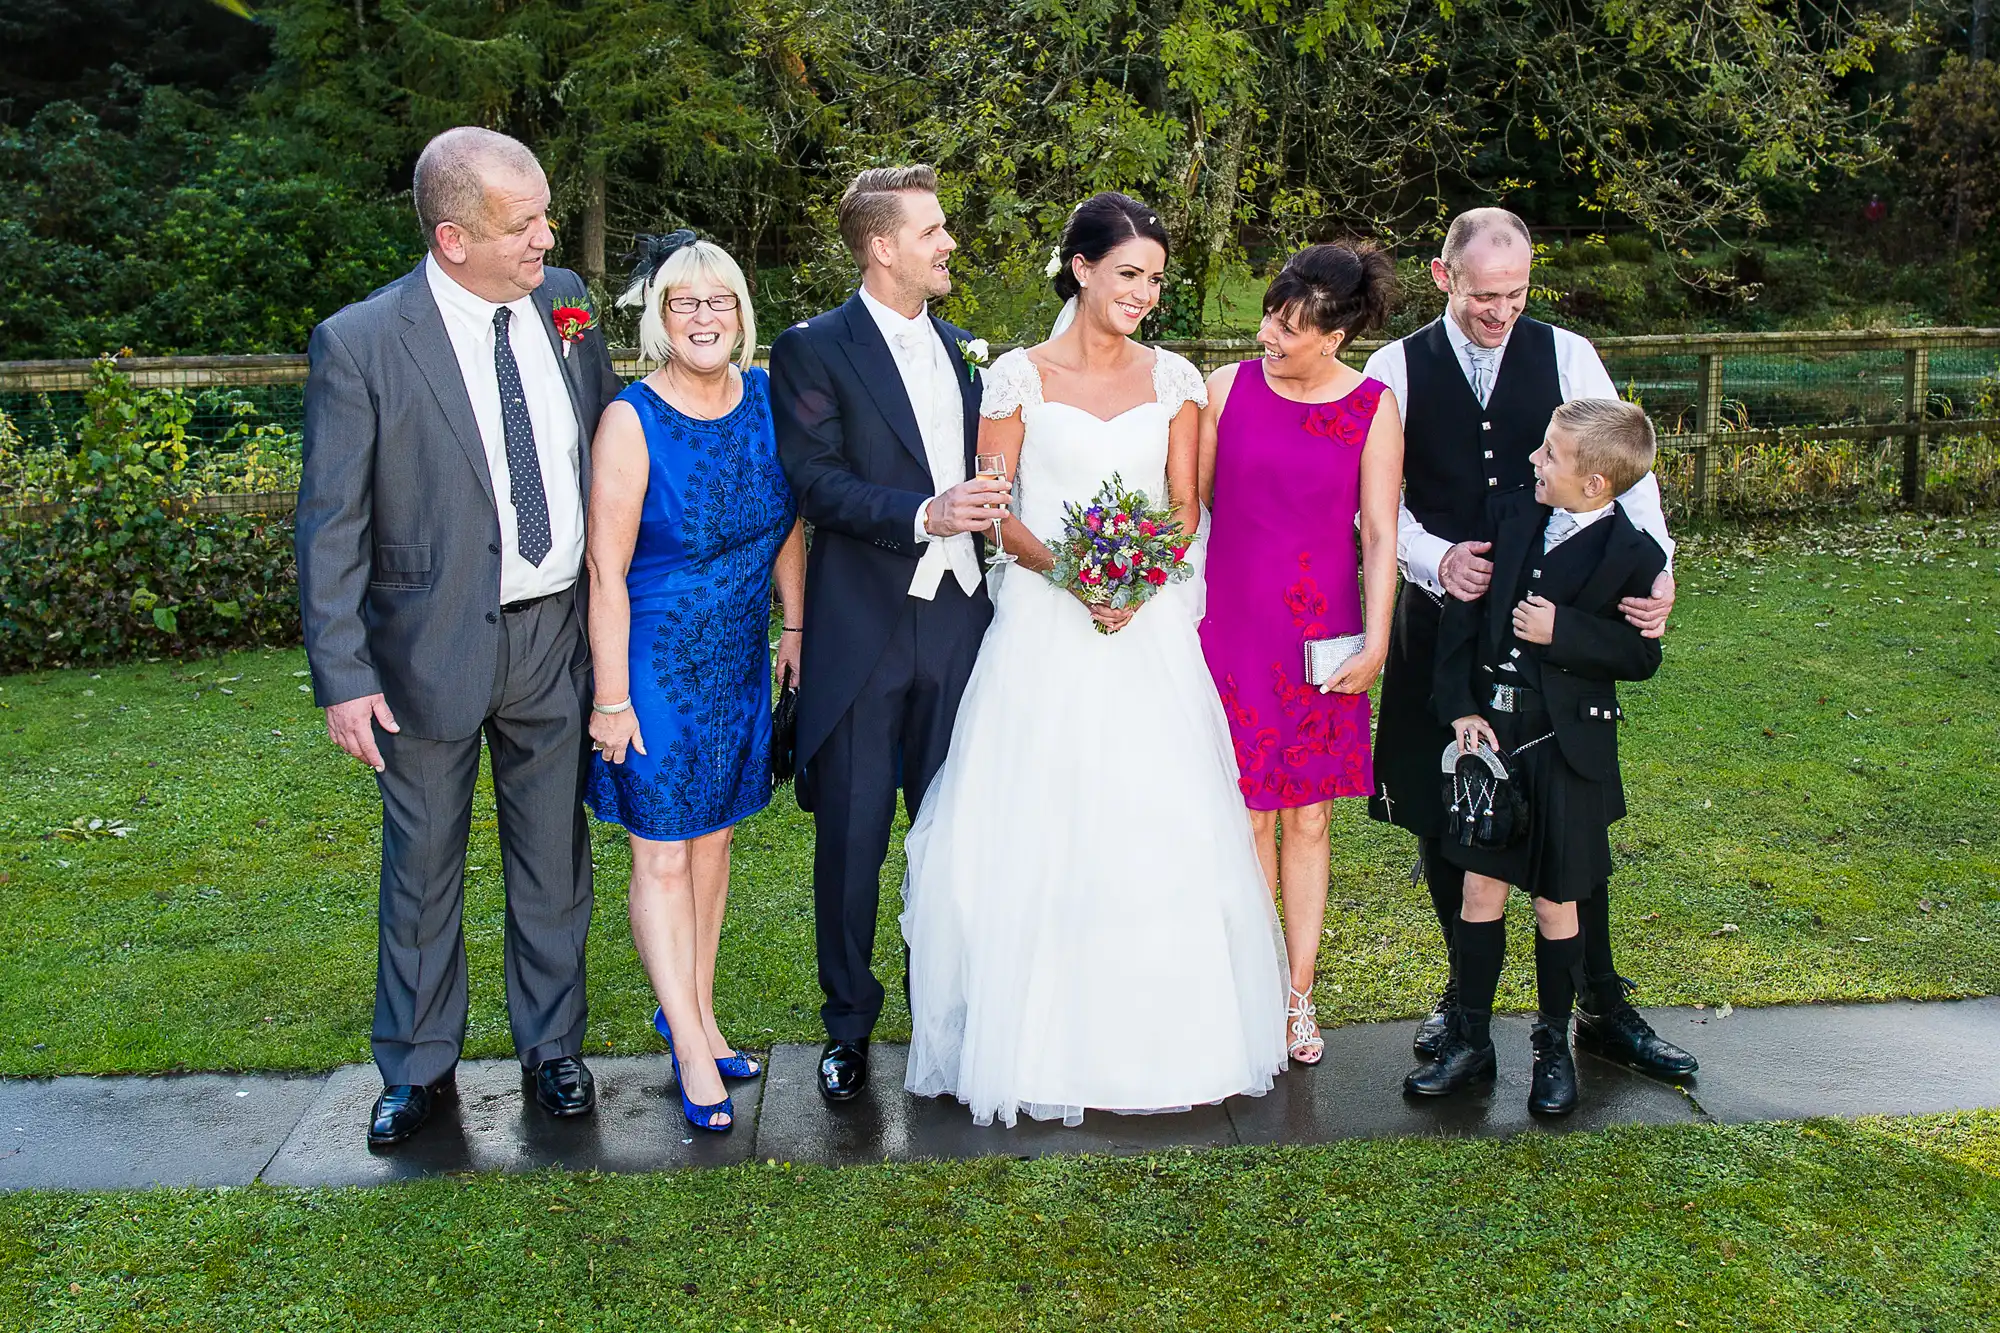 A wedding group photo featuring a bride, groom, and five guests, including two children, smiling outdoors on a sunny day.